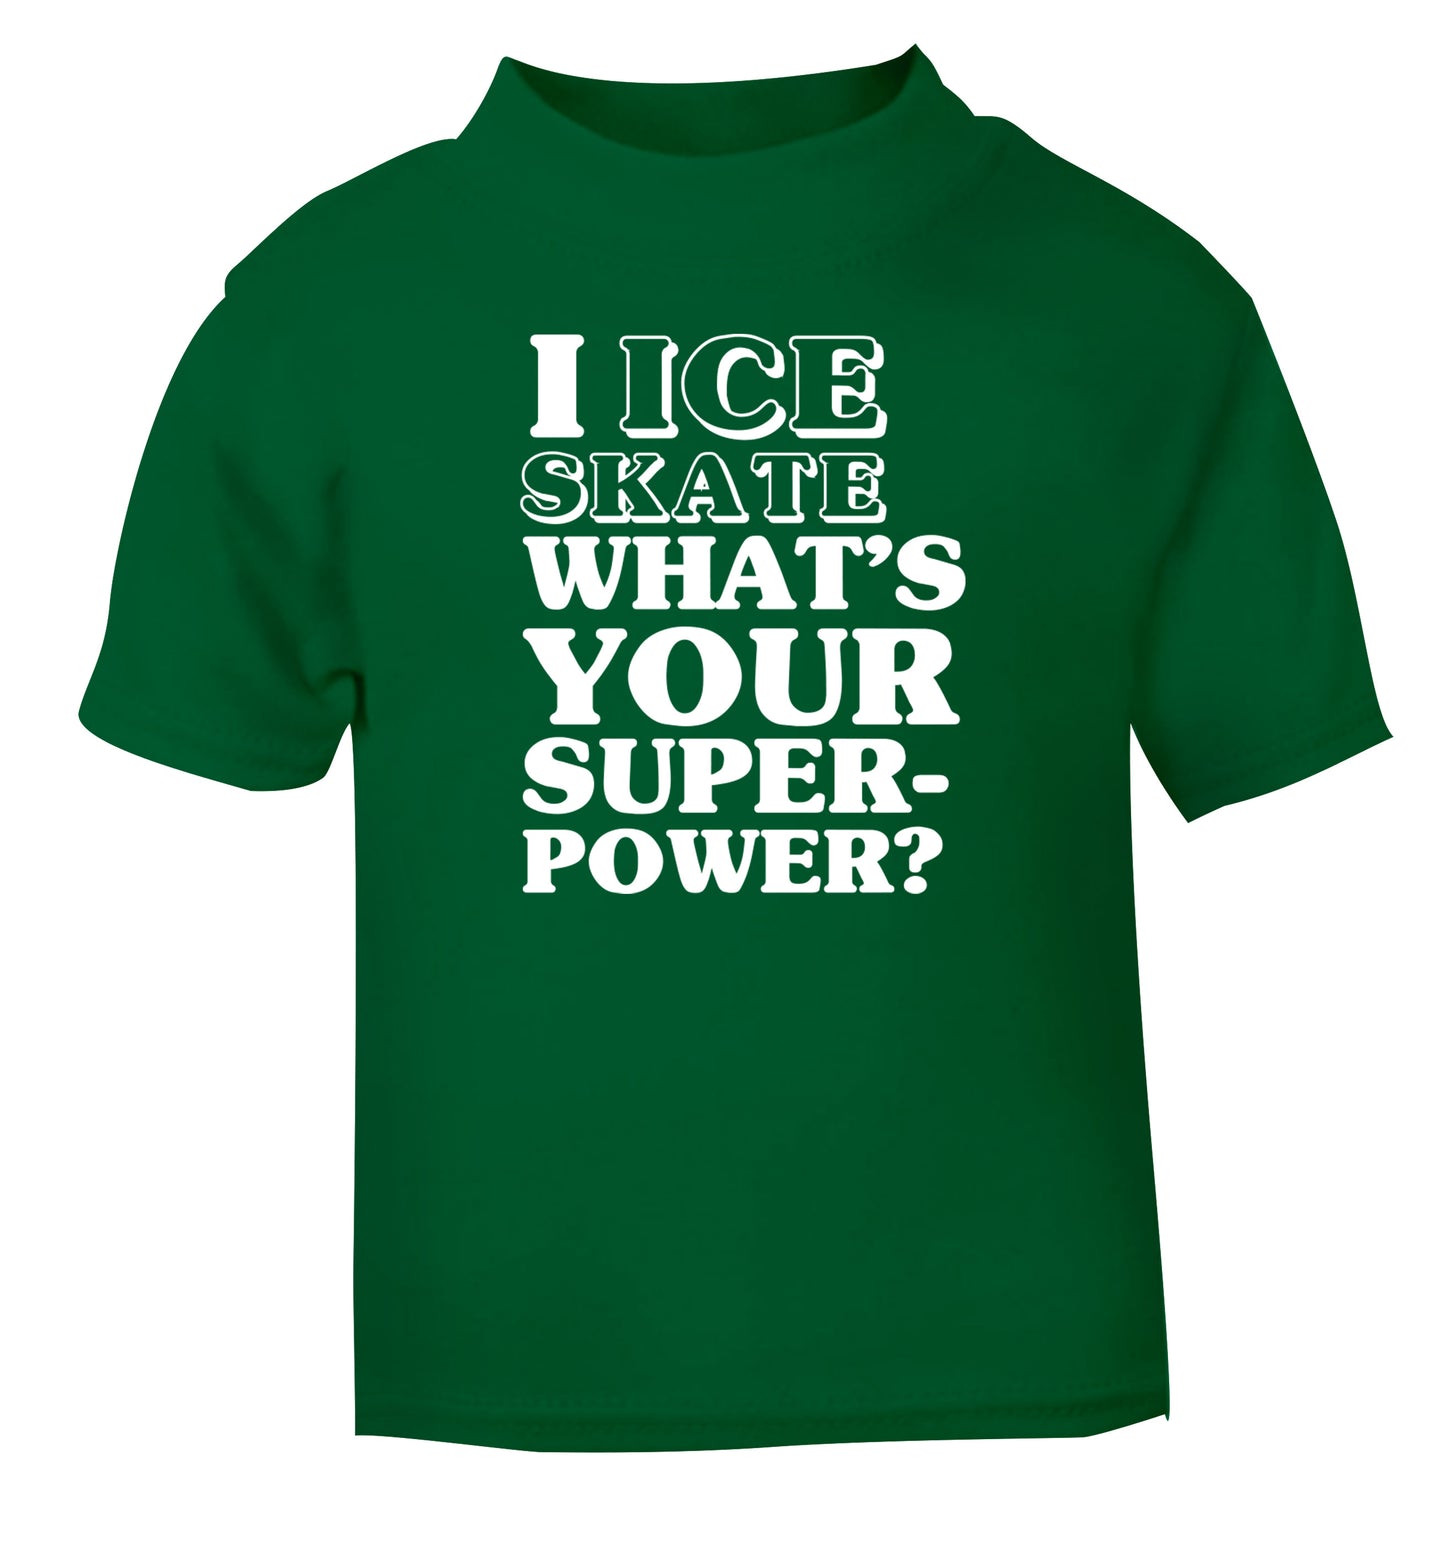 I ice skate what's your superpower? green Baby Toddler Tshirt 2 Years